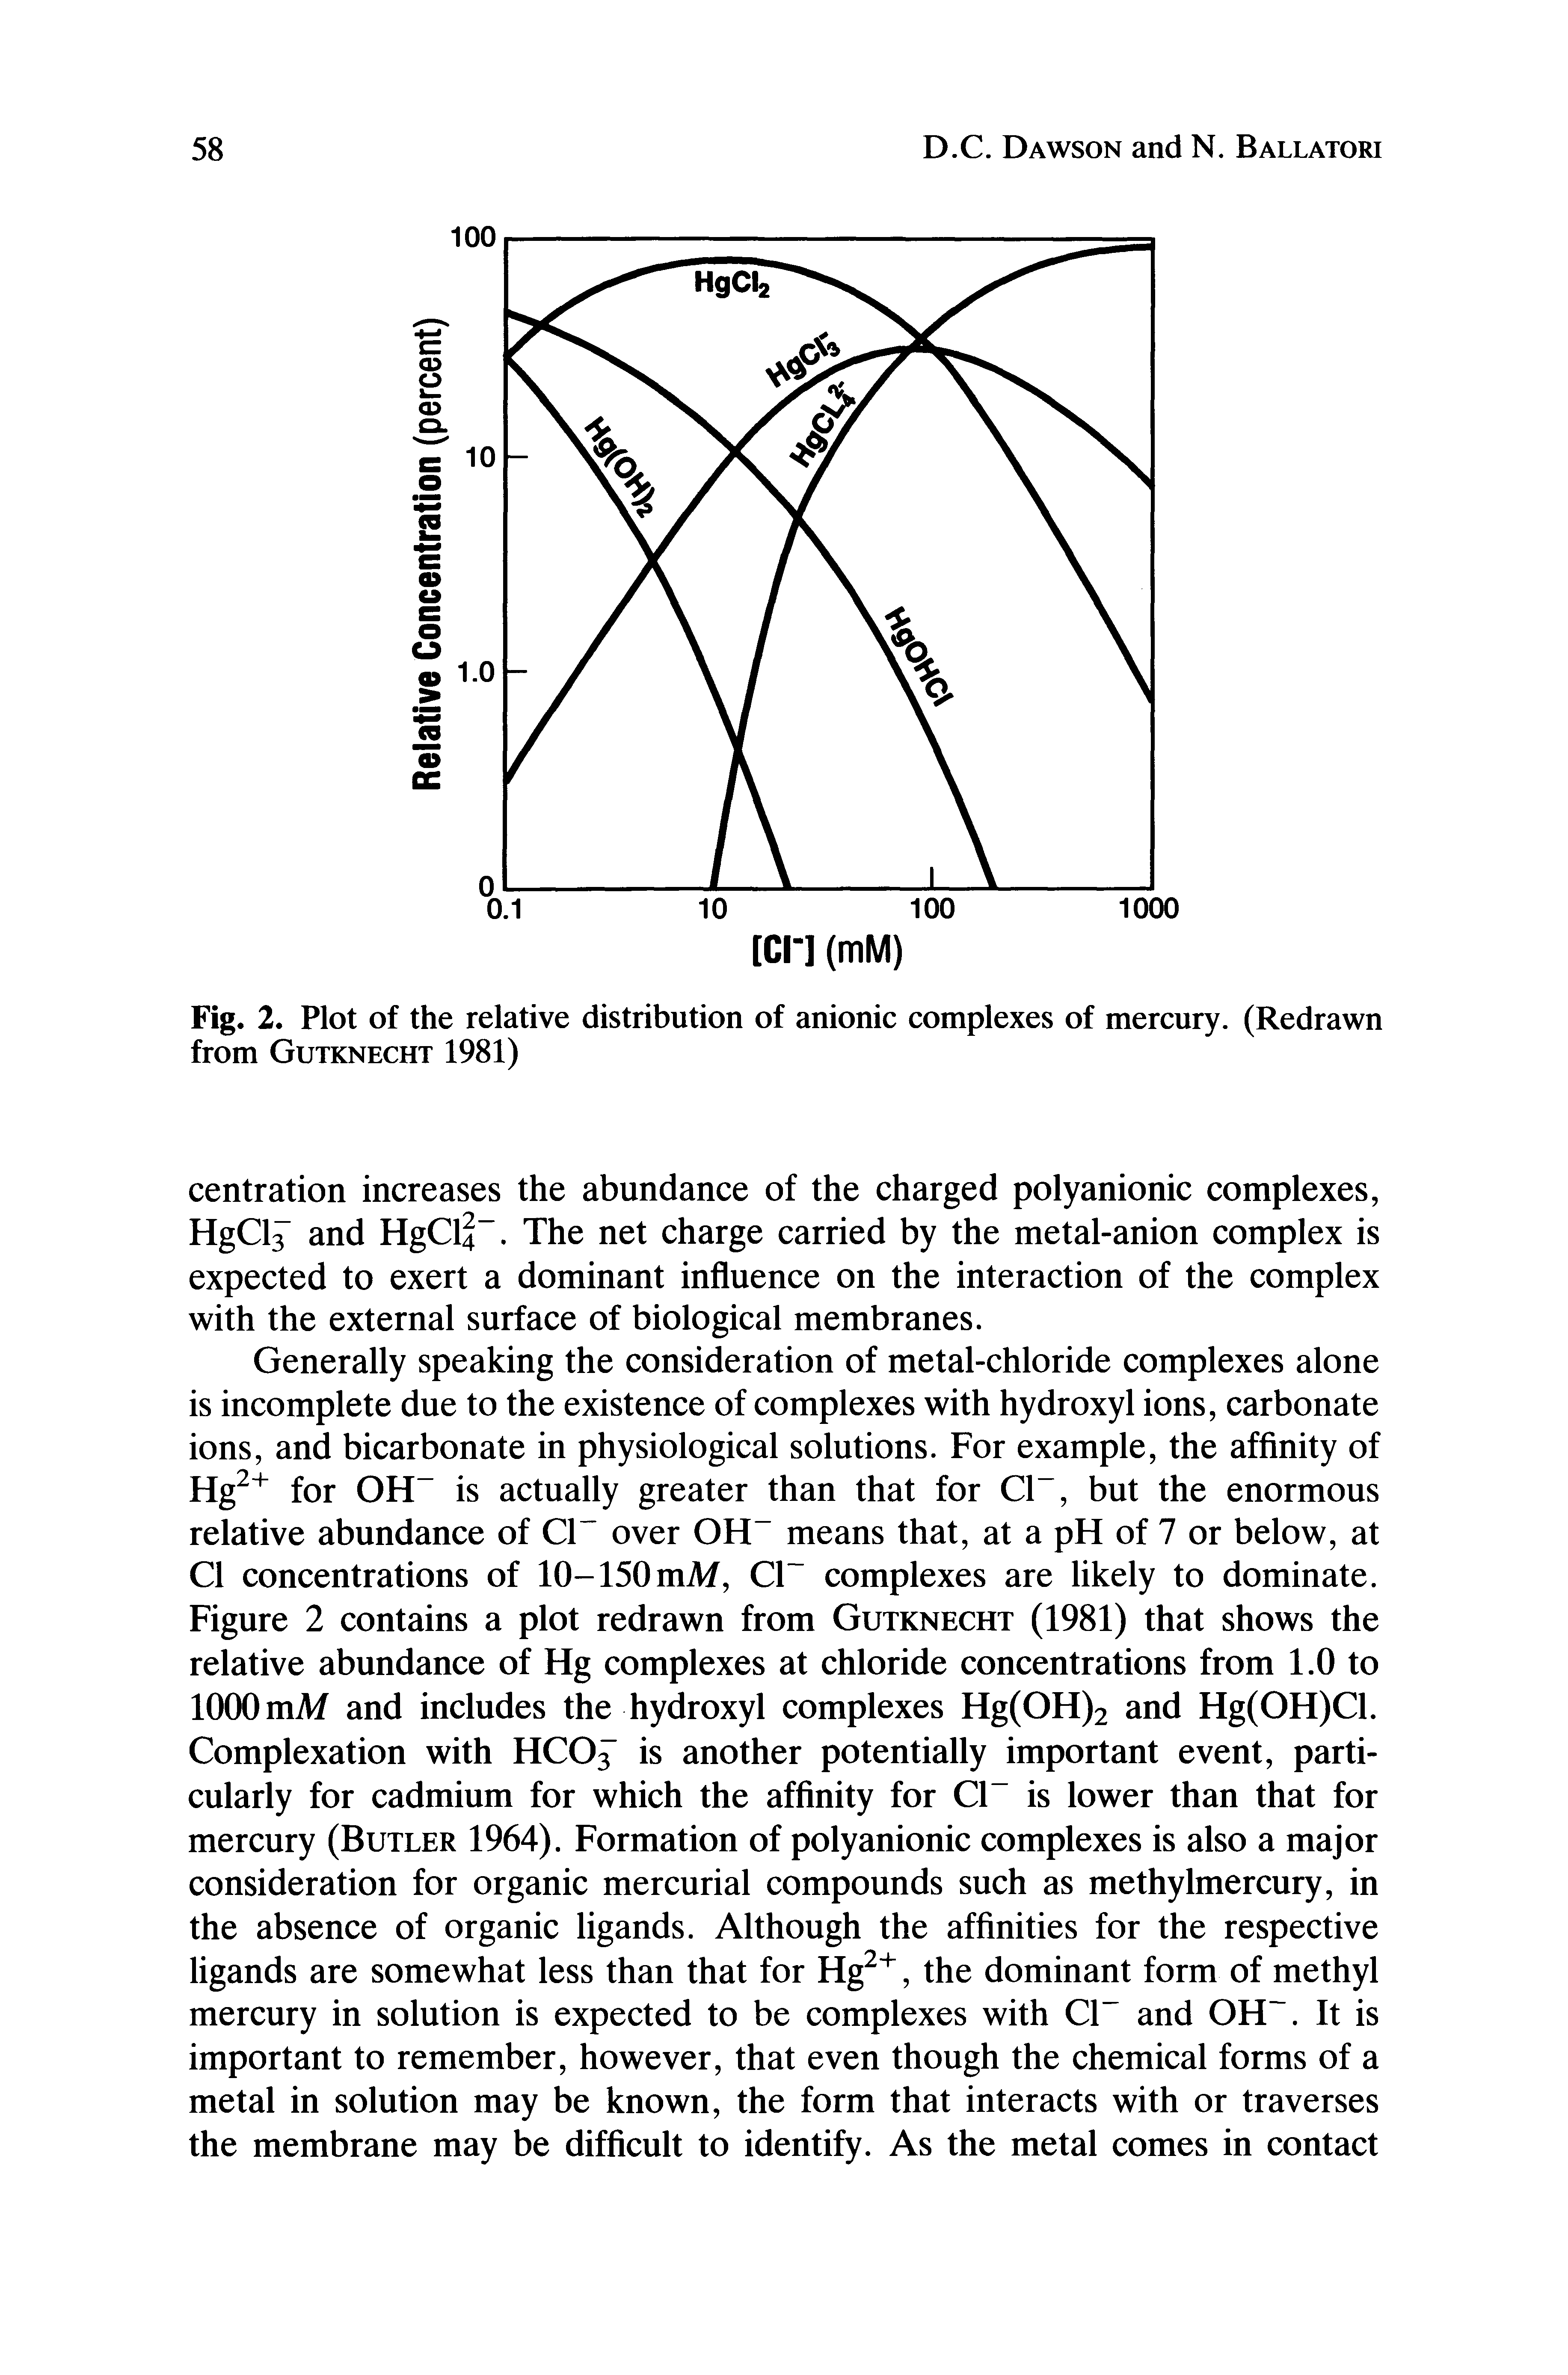 Fig. 2. Plot of the relative distribution of anionic complexes of mercury. (Redrawn from Gutknecht 1981)...